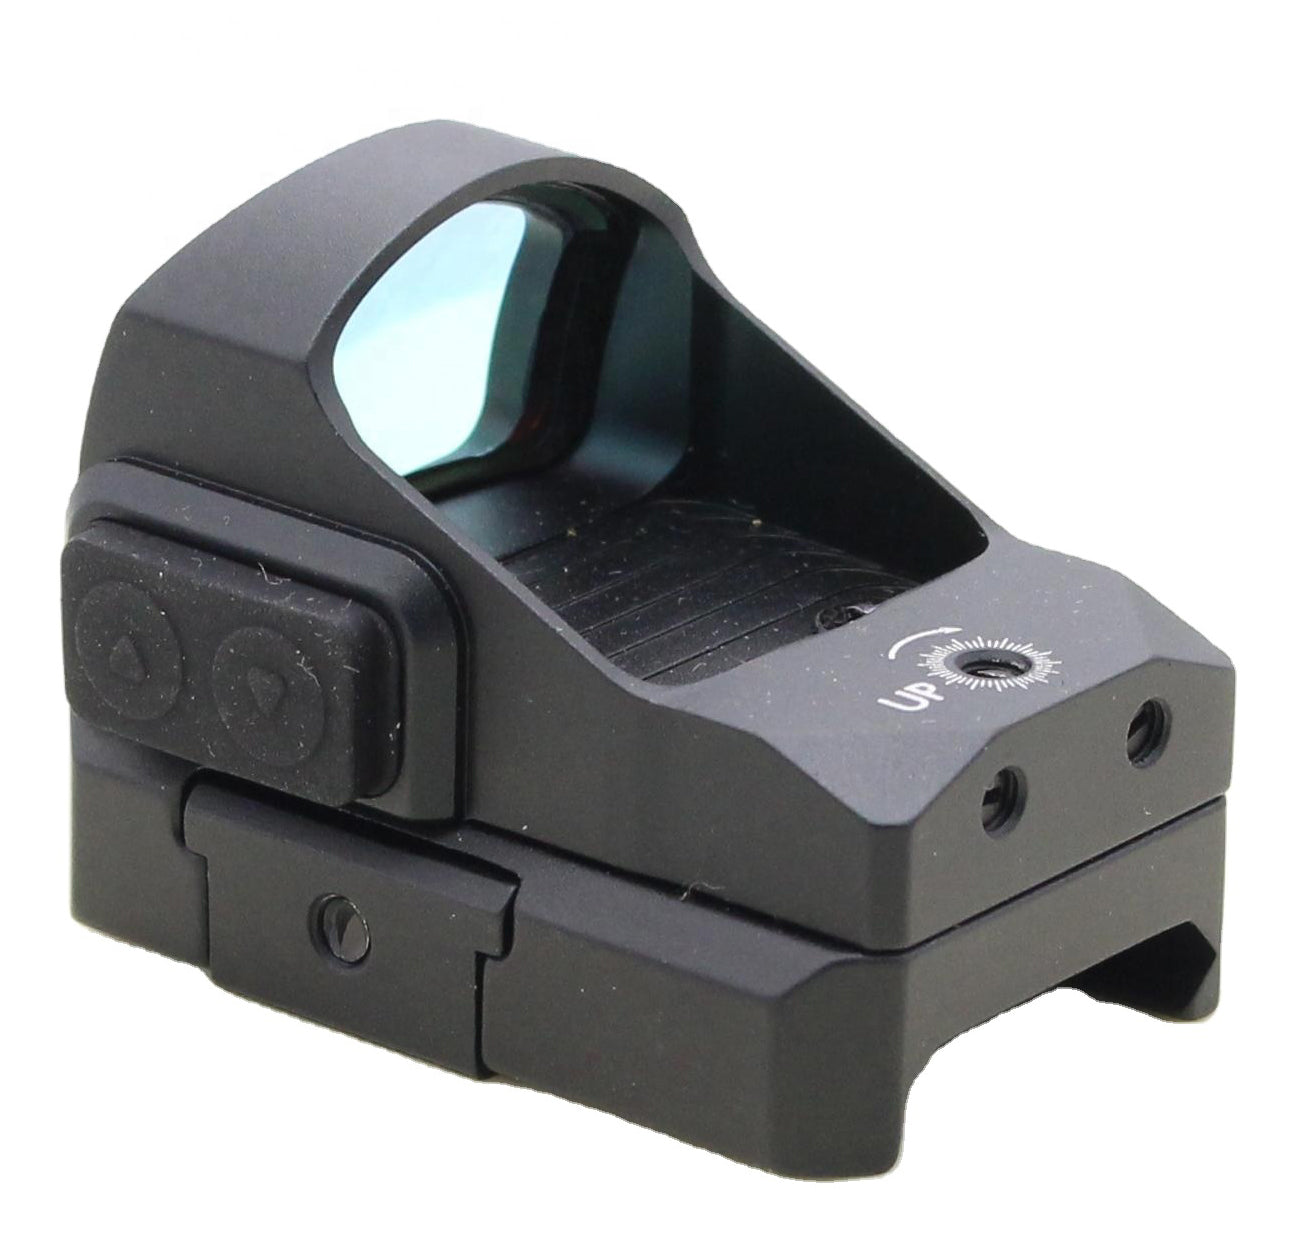 1x 24x17 Power x Obj.Lens Hold Recoil From Caliber .223 1MOA Red Dot Sight